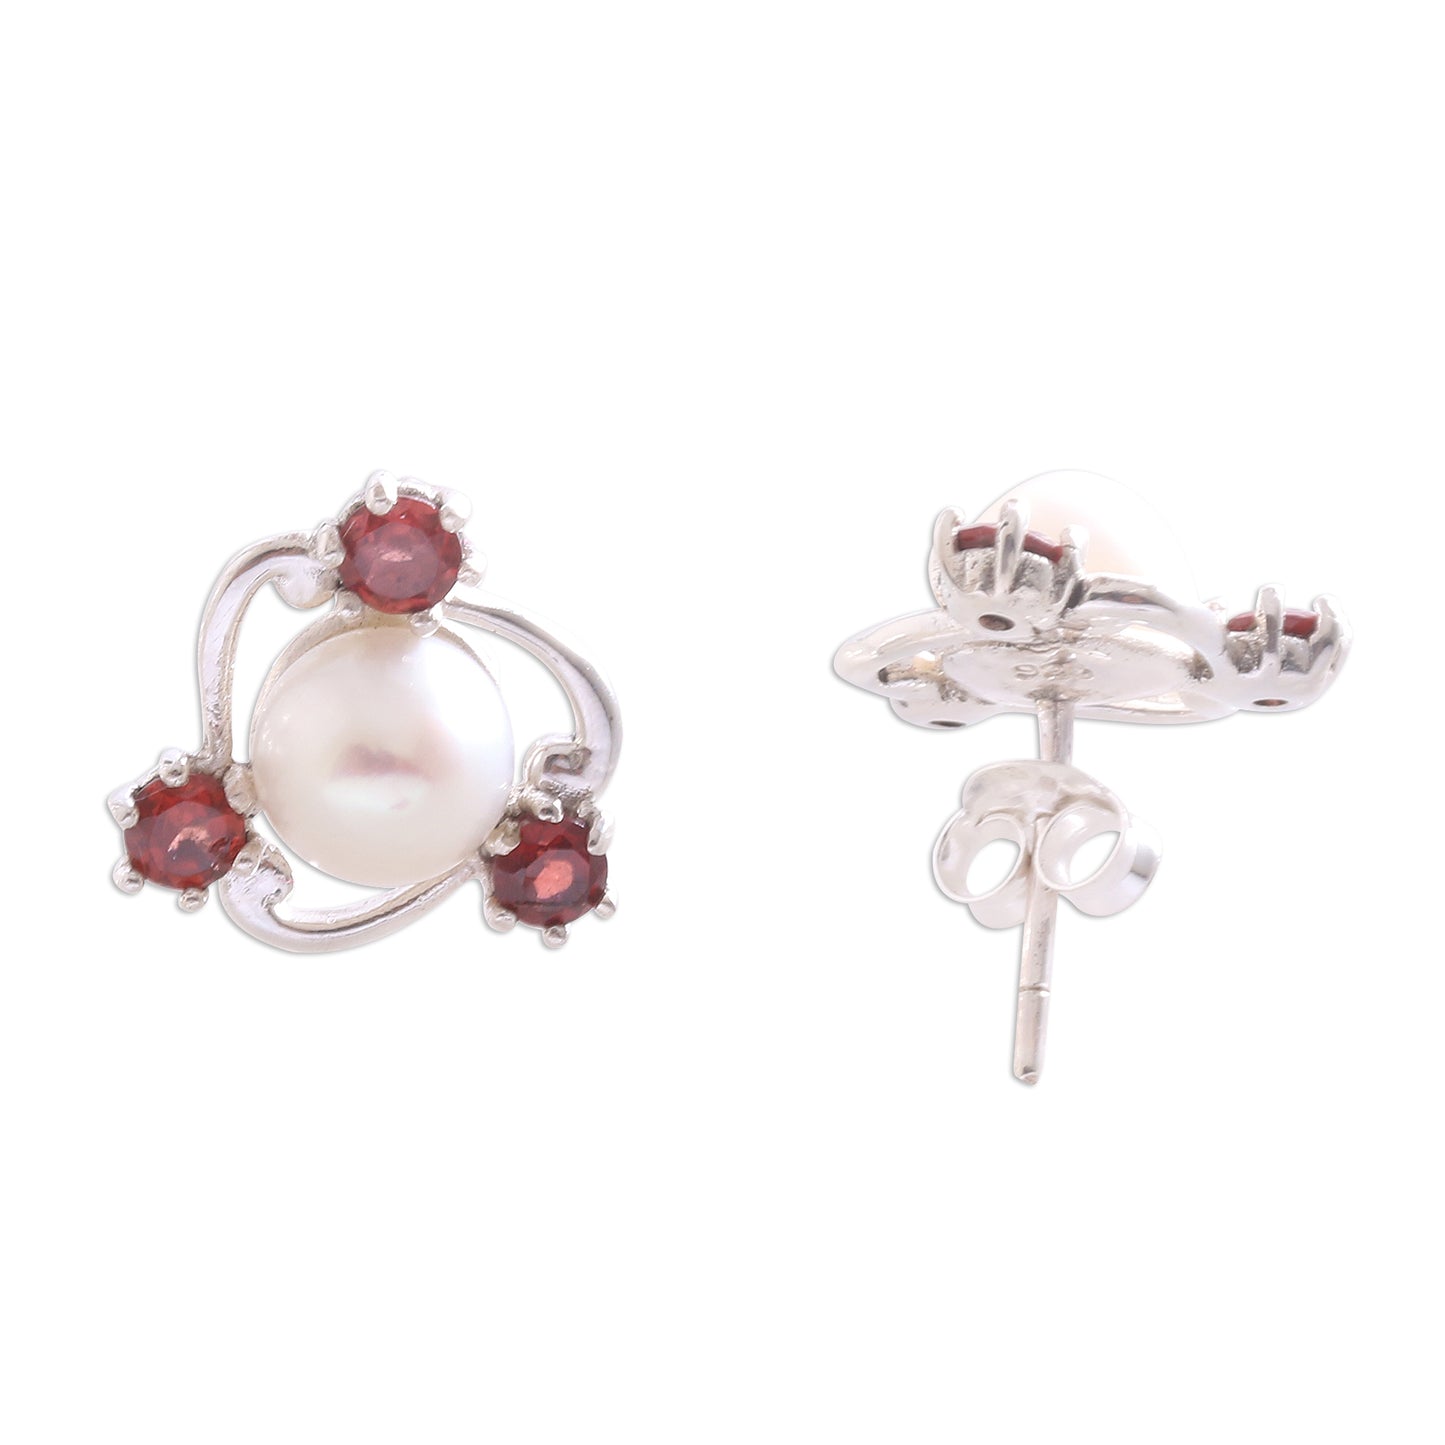 Sparks Fly Cultured Pearl and Garnet Stud Earrings from Bali